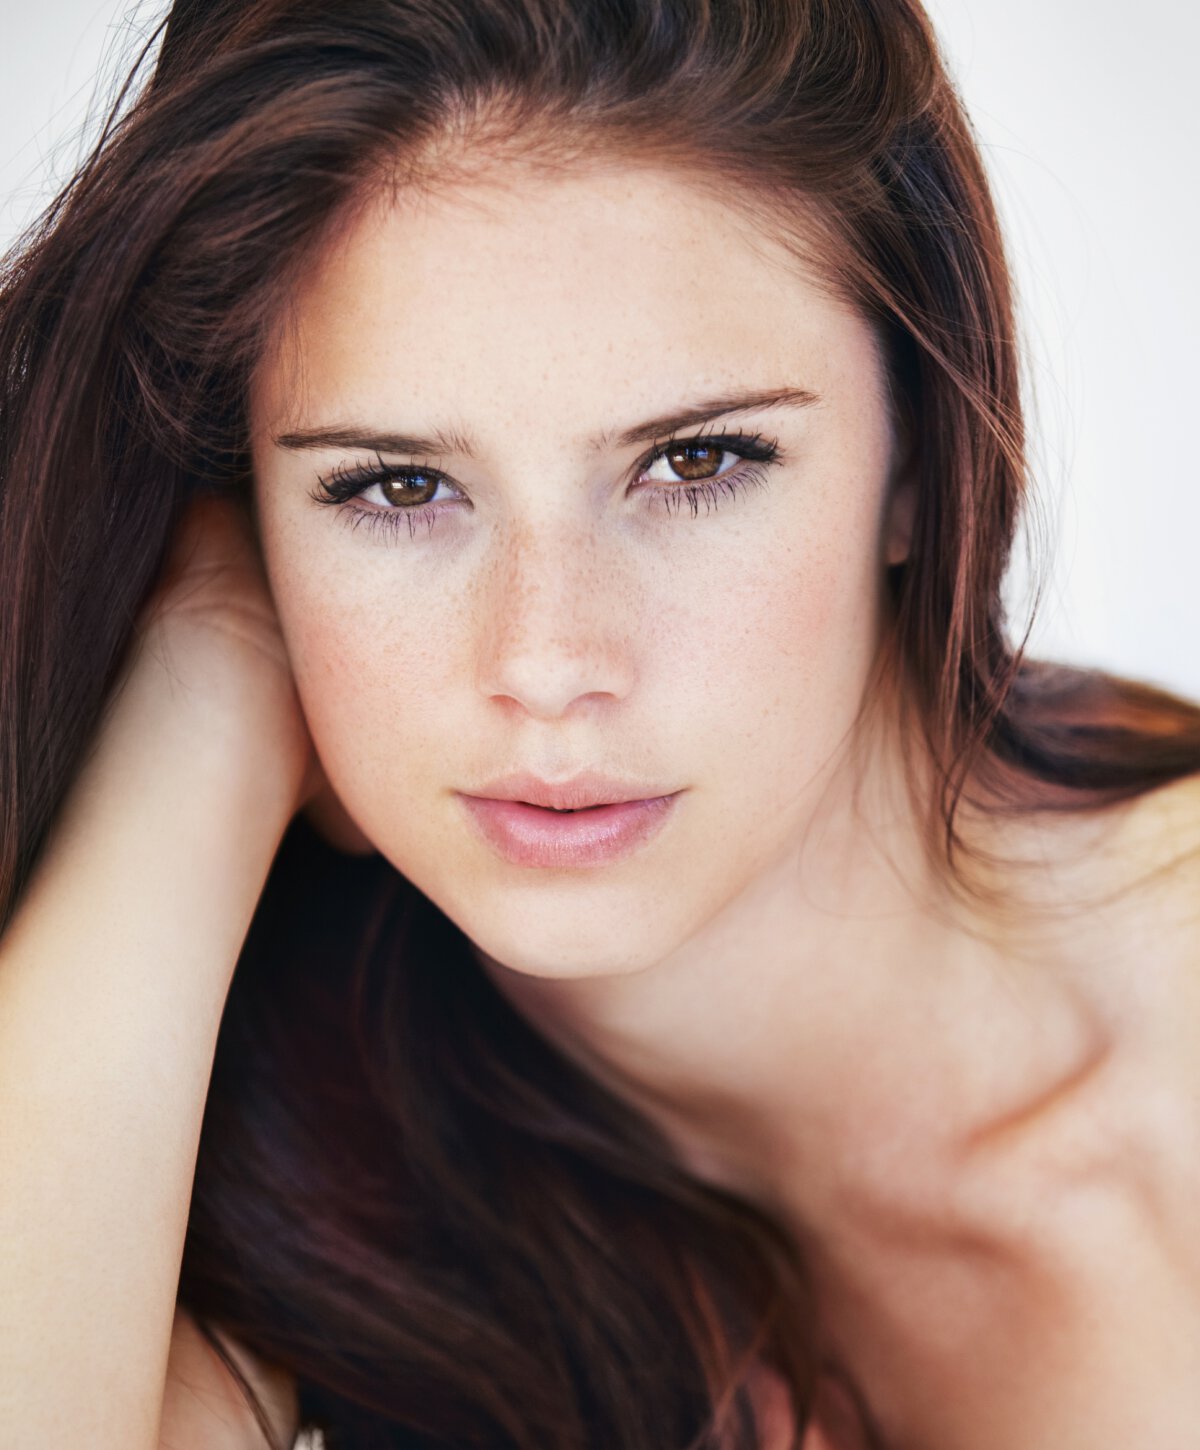 Los Angeles juvederm model with brown hair